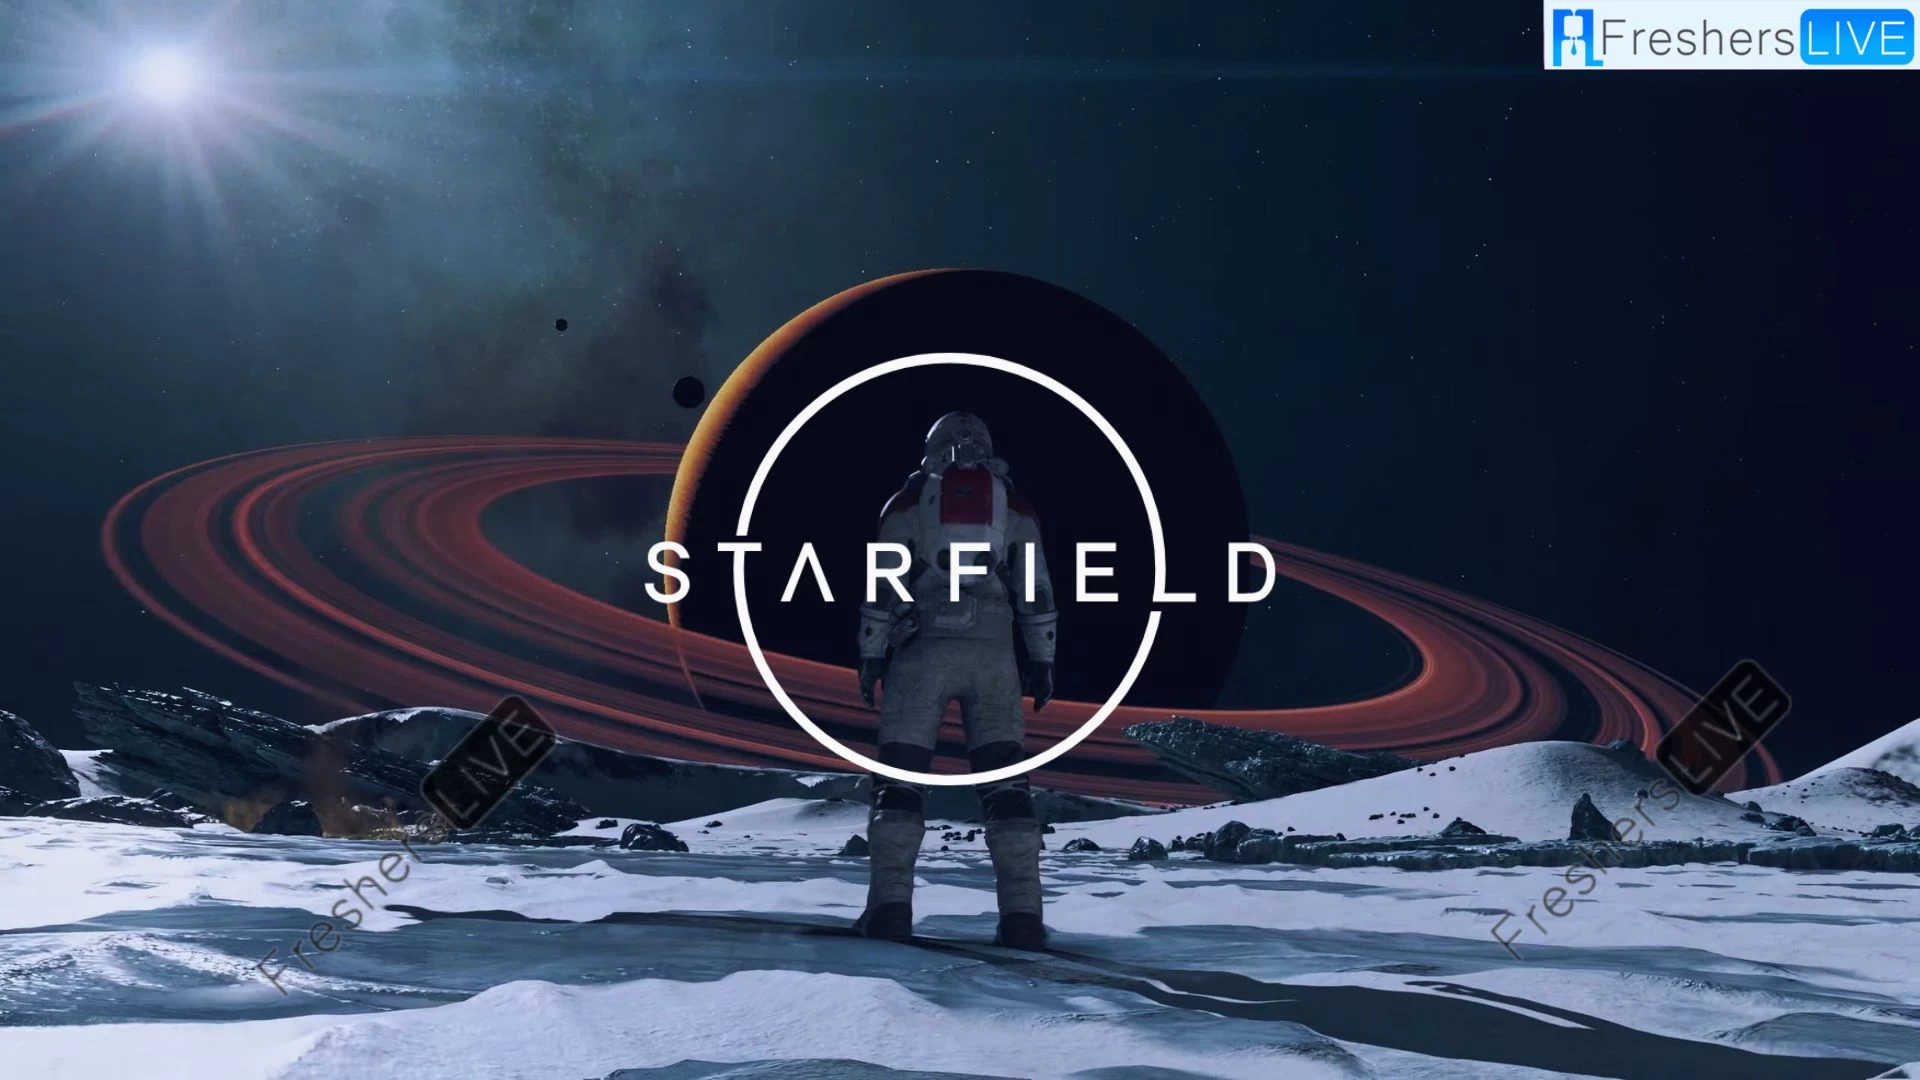 How to Rename Your Ship in Starfield? A Step-by-Step Guide